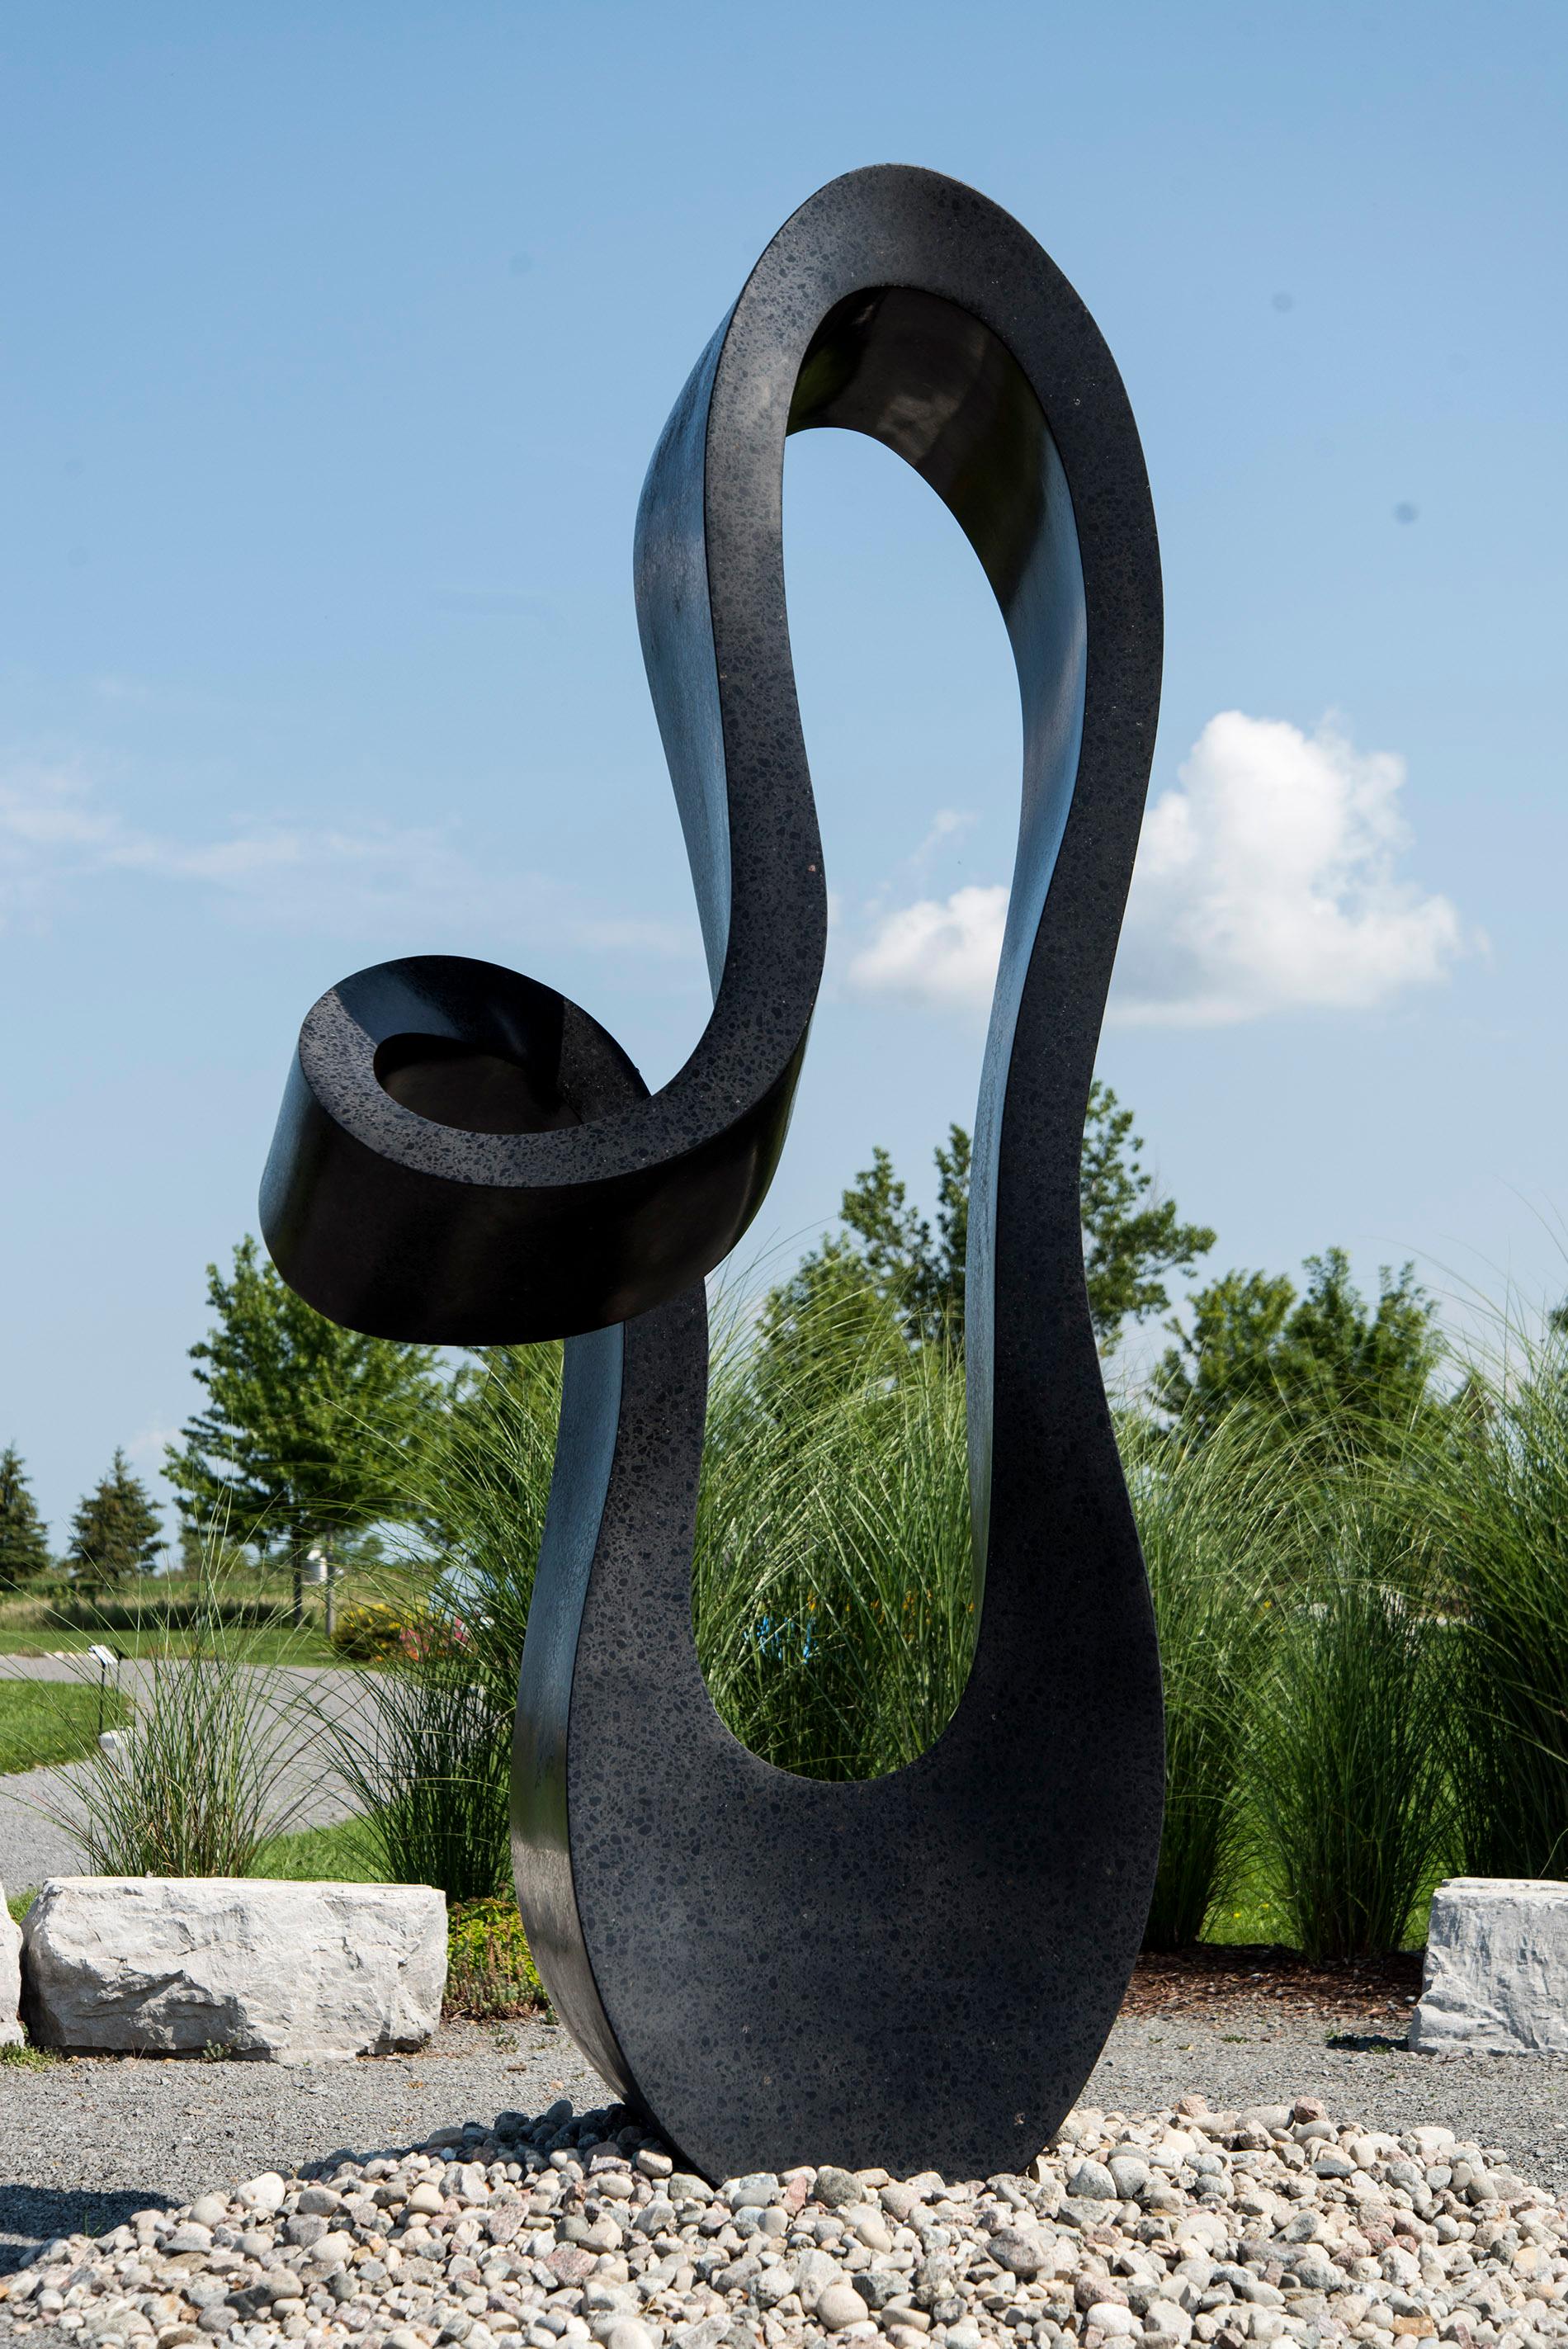 Signature No 5 - large, smooth, black granite, outdoor, abstract, sculpture - Contemporary Sculpture by Jeremy Guy